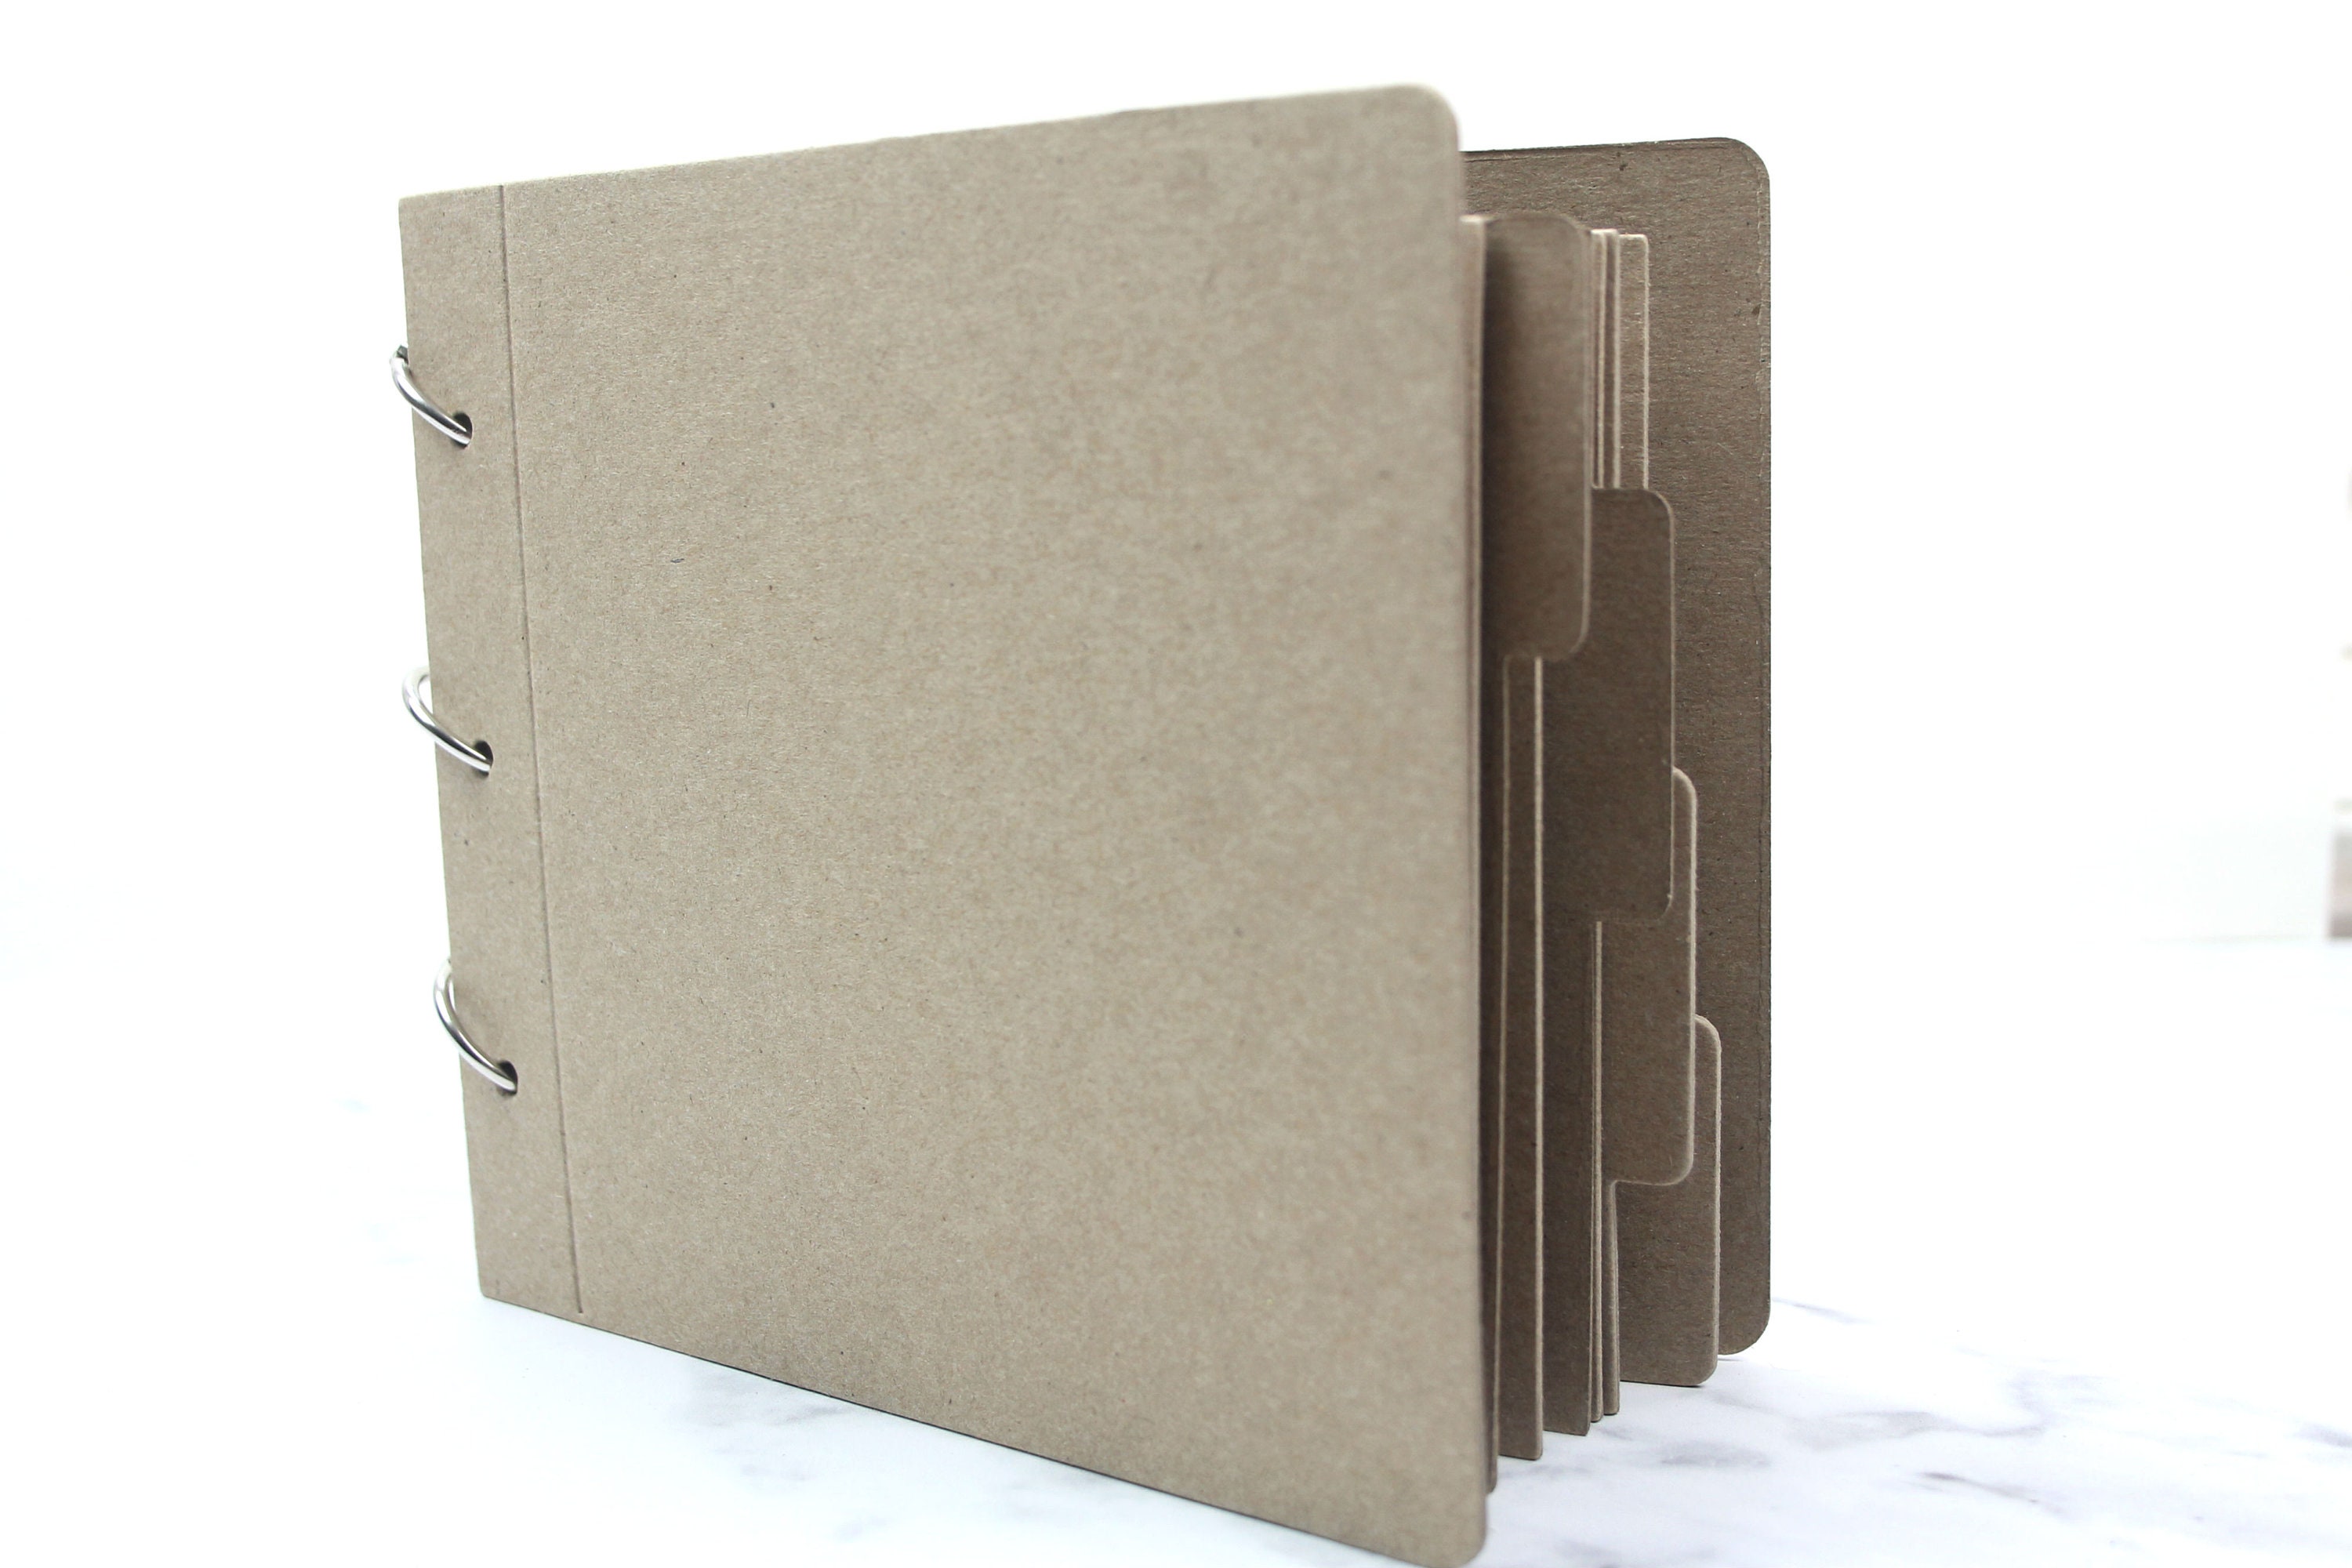 Blank Scrapbook-7 1/2 X 6 1/2 Bare Chipboard Album-tabbed Blank  Journal-file Folder Page Album 11 Pages Total 